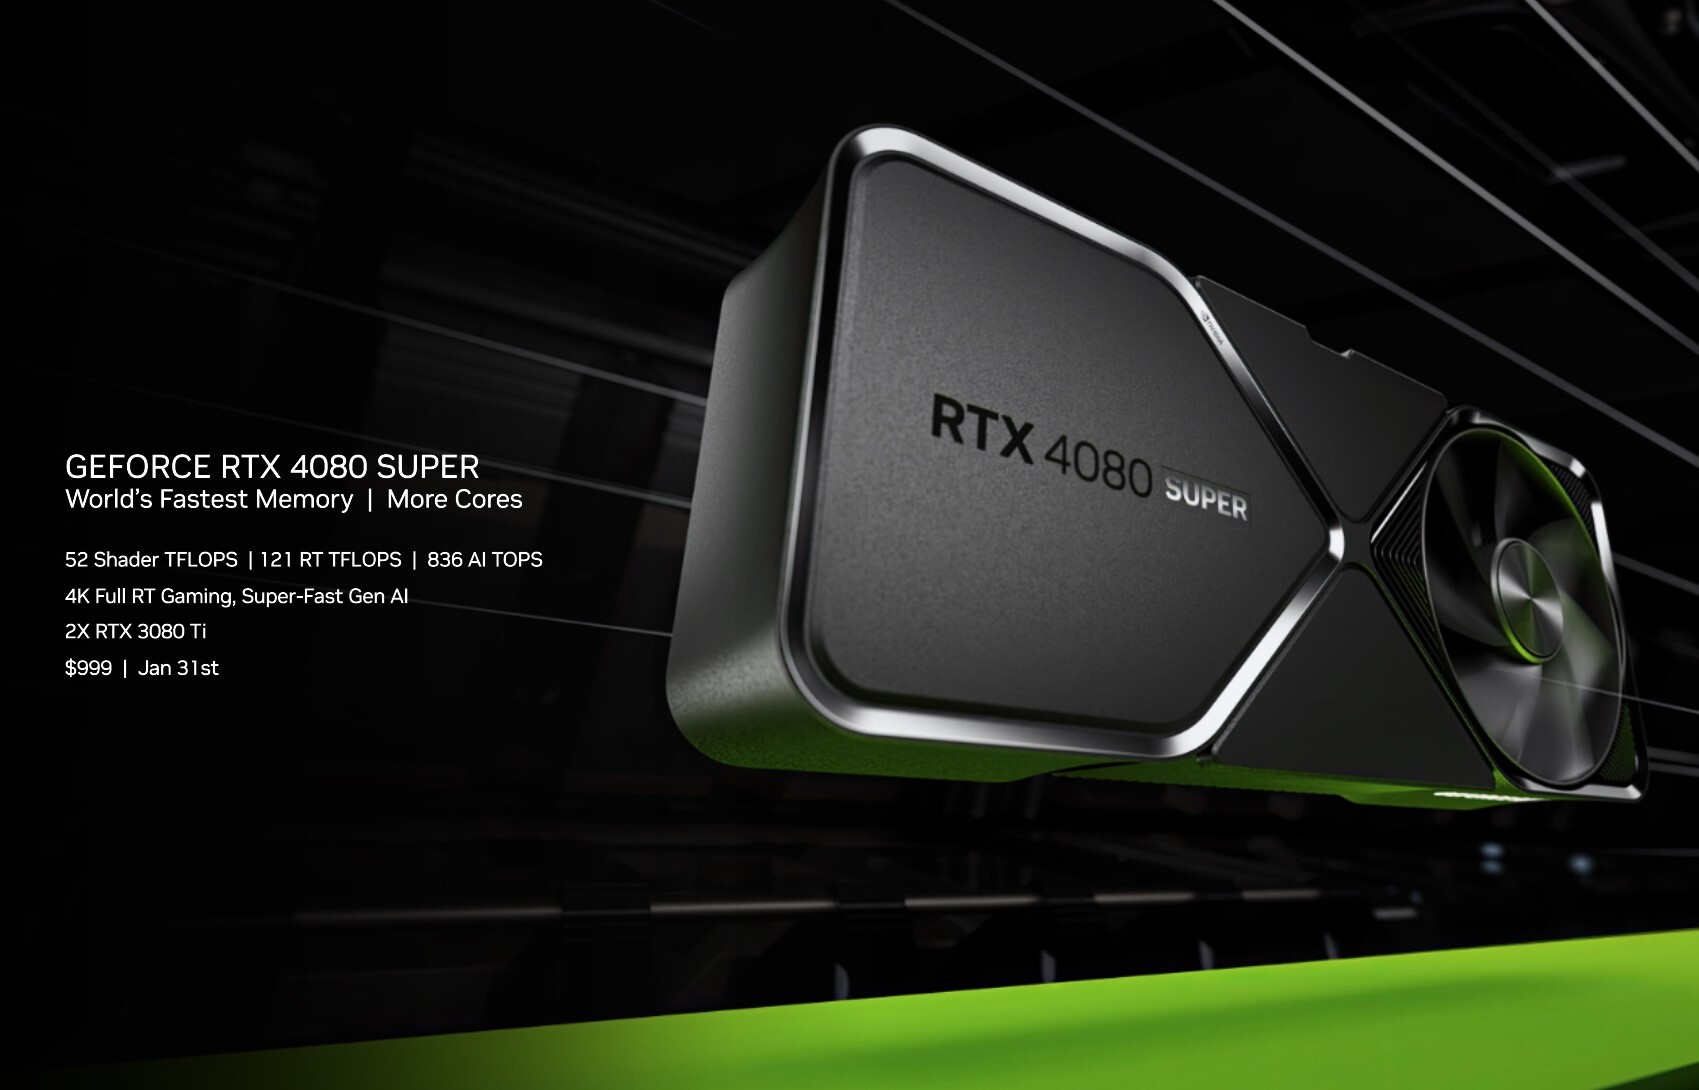 Surprise Leaks Reveal Nvidia's RTX 4070 Performance And Design